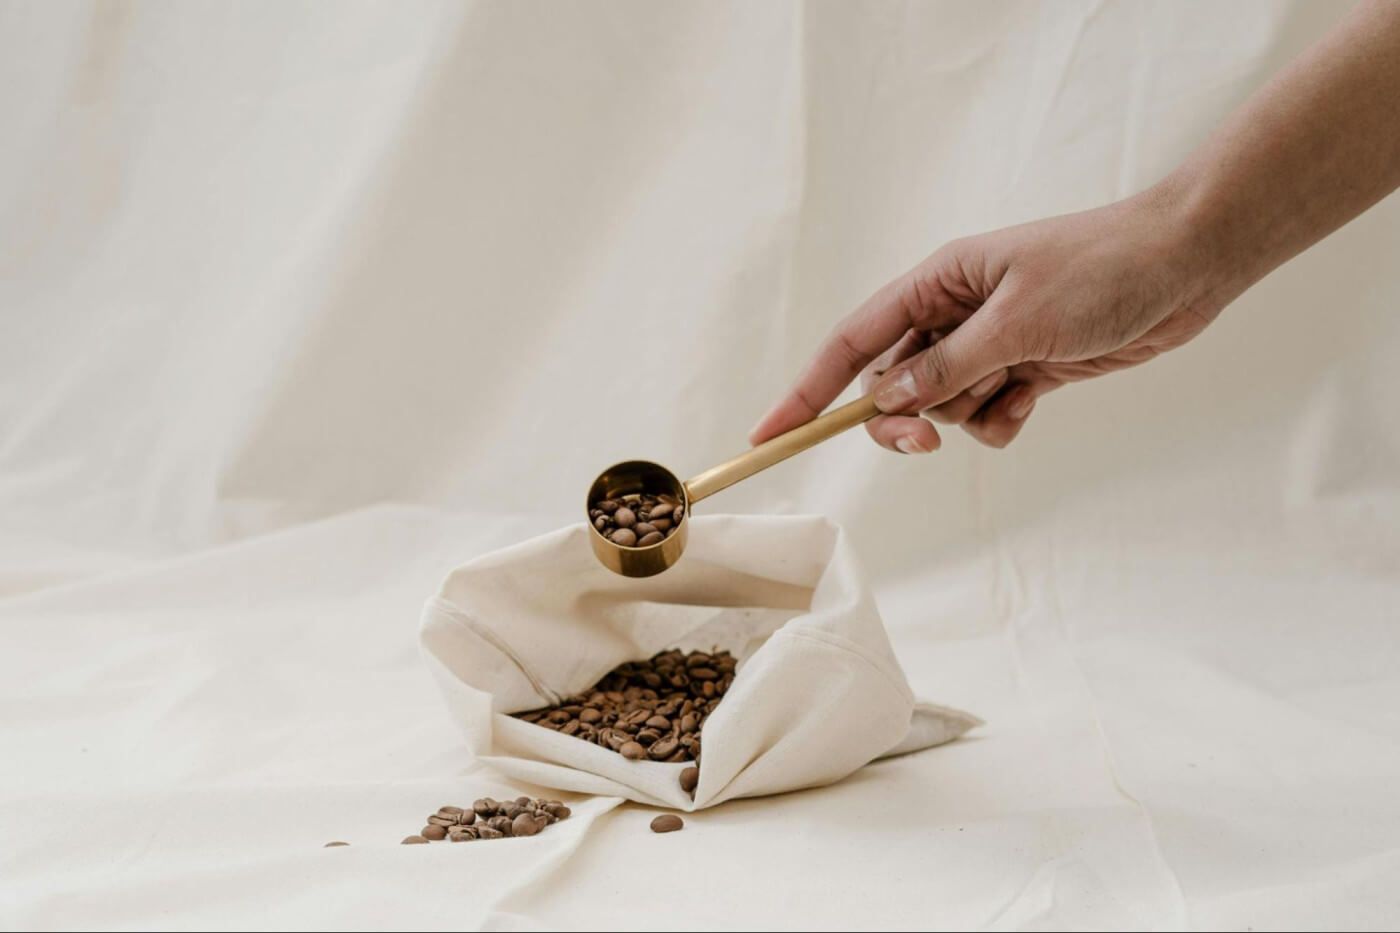 Hand scoops out coffee beans from an open coffee bag